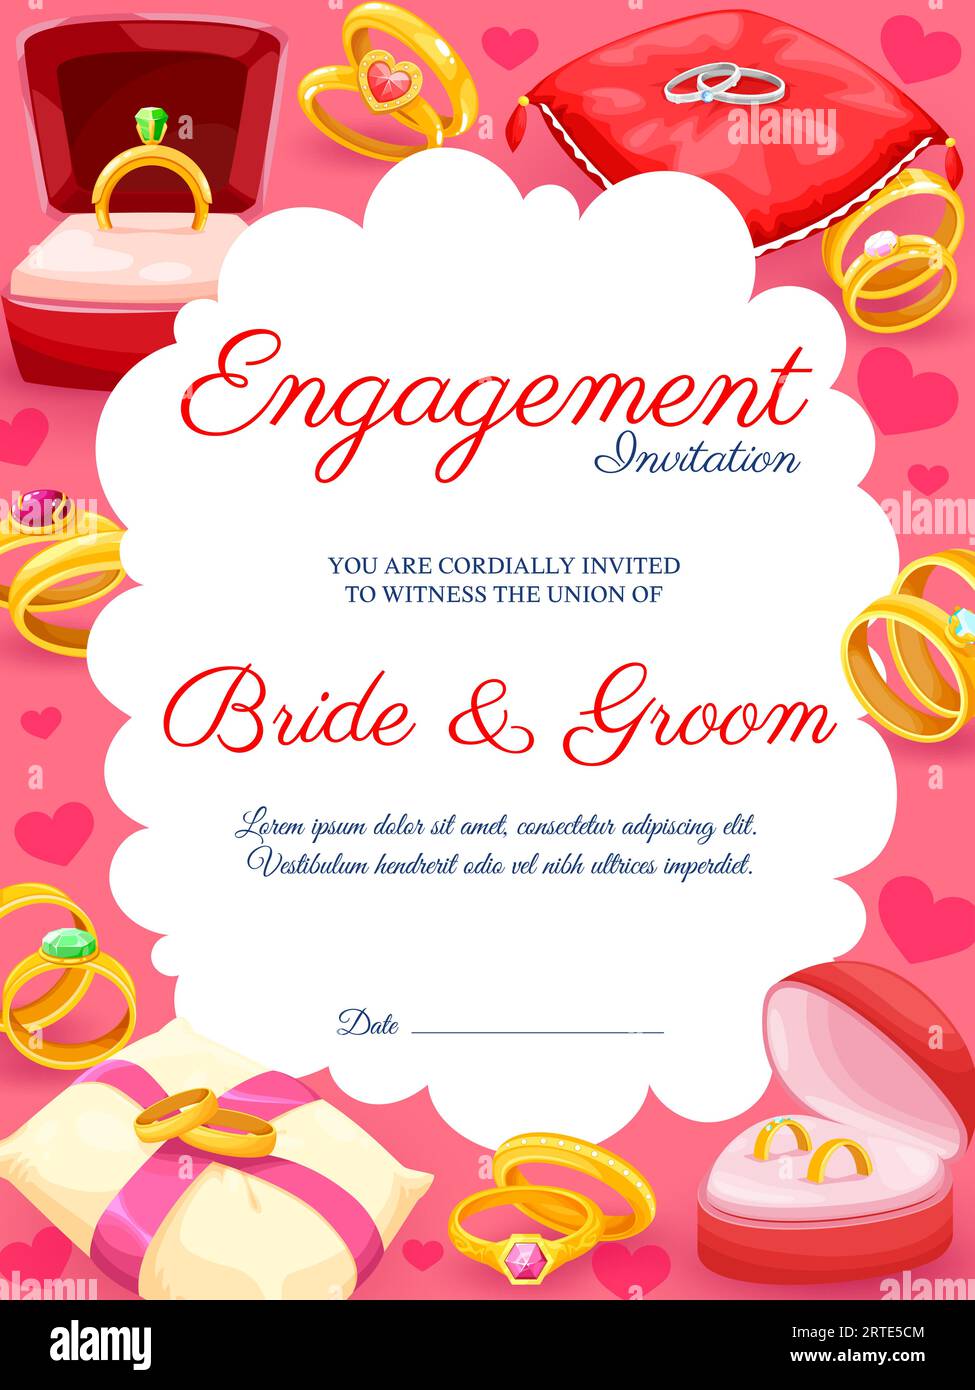 Engagement Invitation Card With Name Editing, Make Your Card